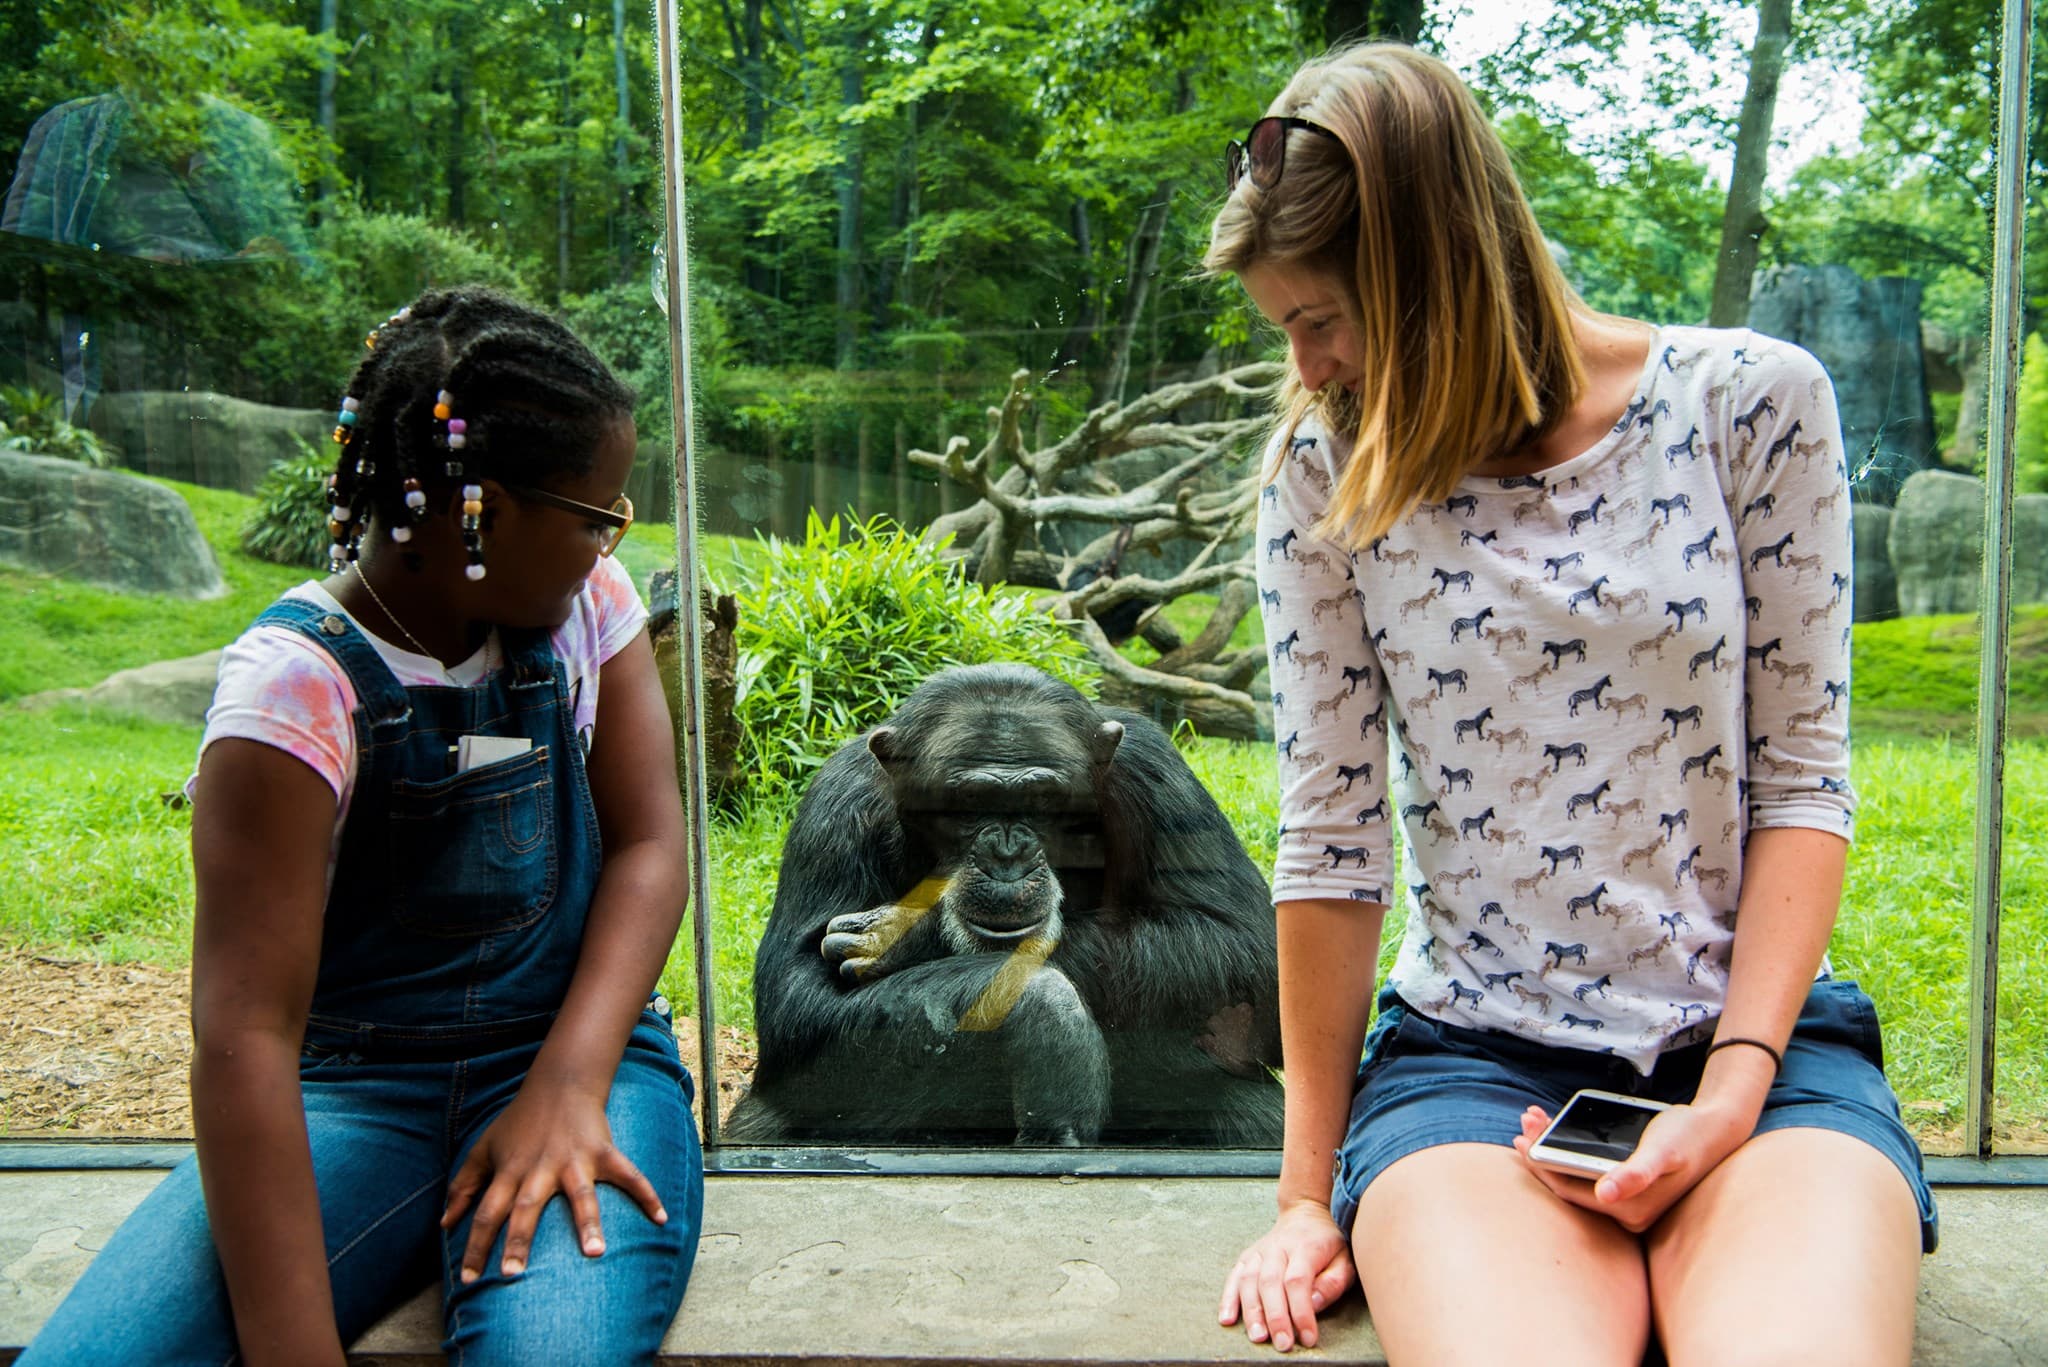 Two young girls sit behind a glass window with a chimpanzee sitting between them.